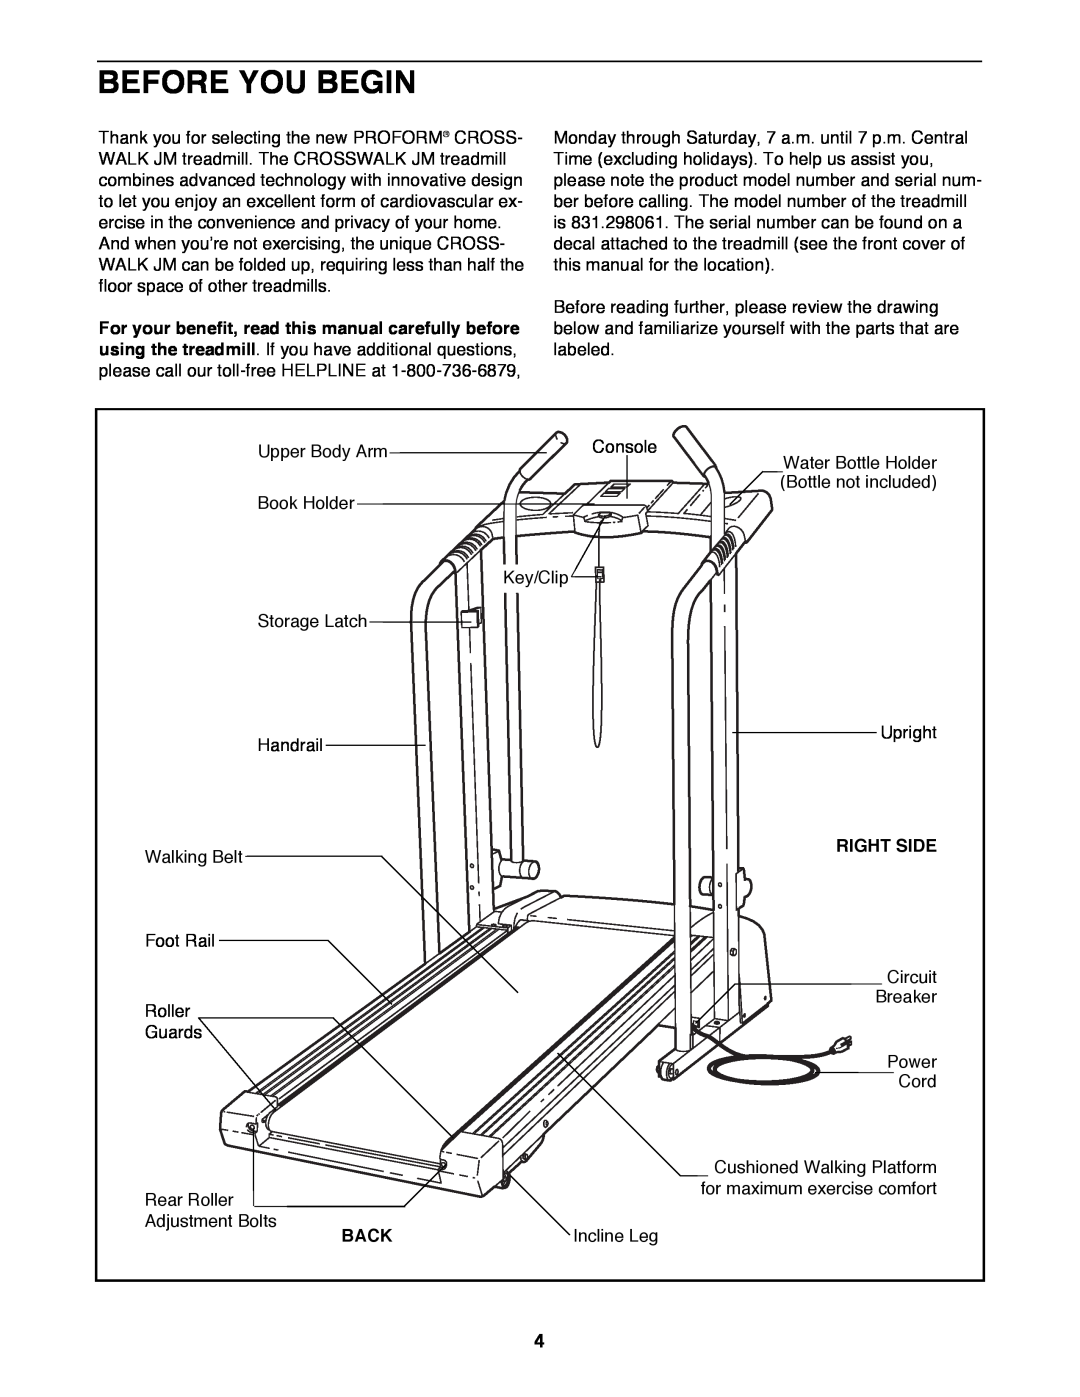 ProForm 831.298061 user manual Before You Begin, Right Side, Back 